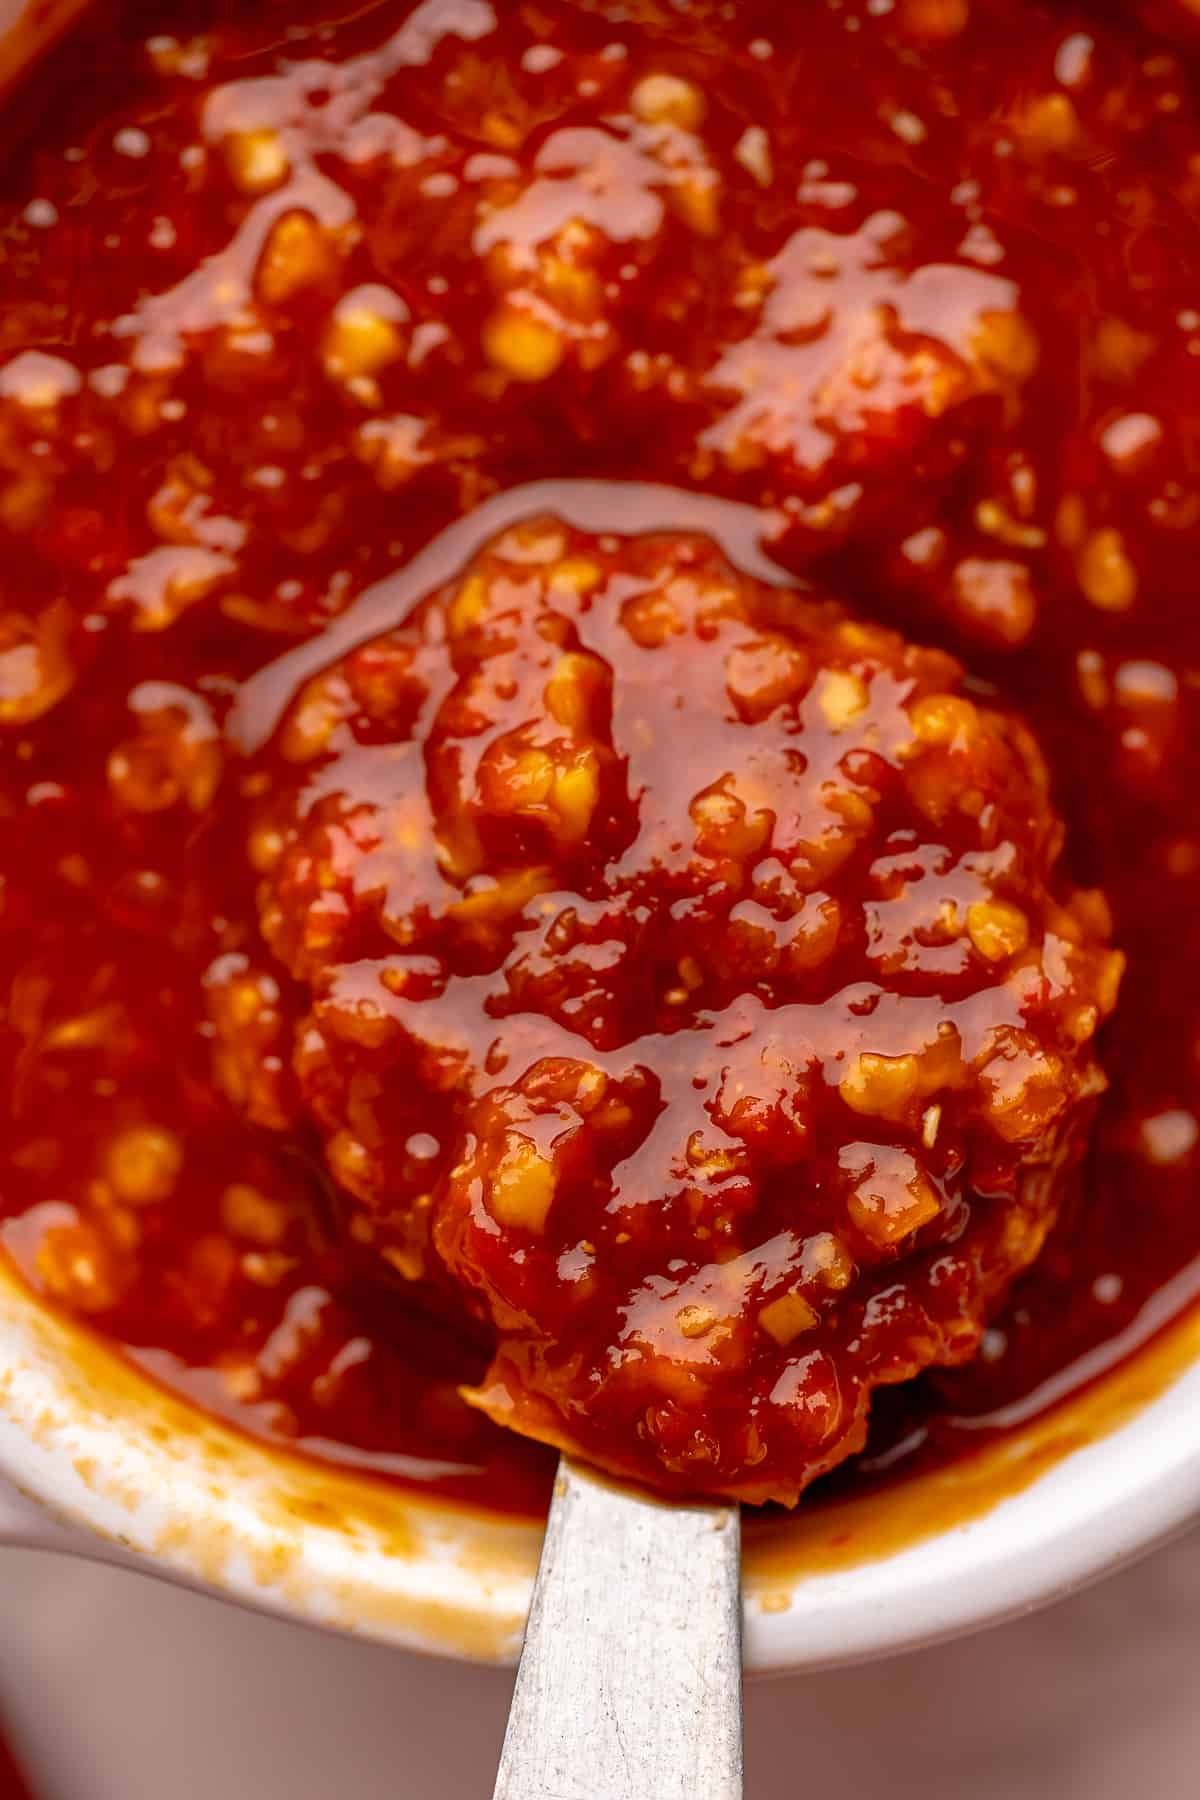 Close-up shot of finished sauce, with a spoon showing the texture of the sauce.